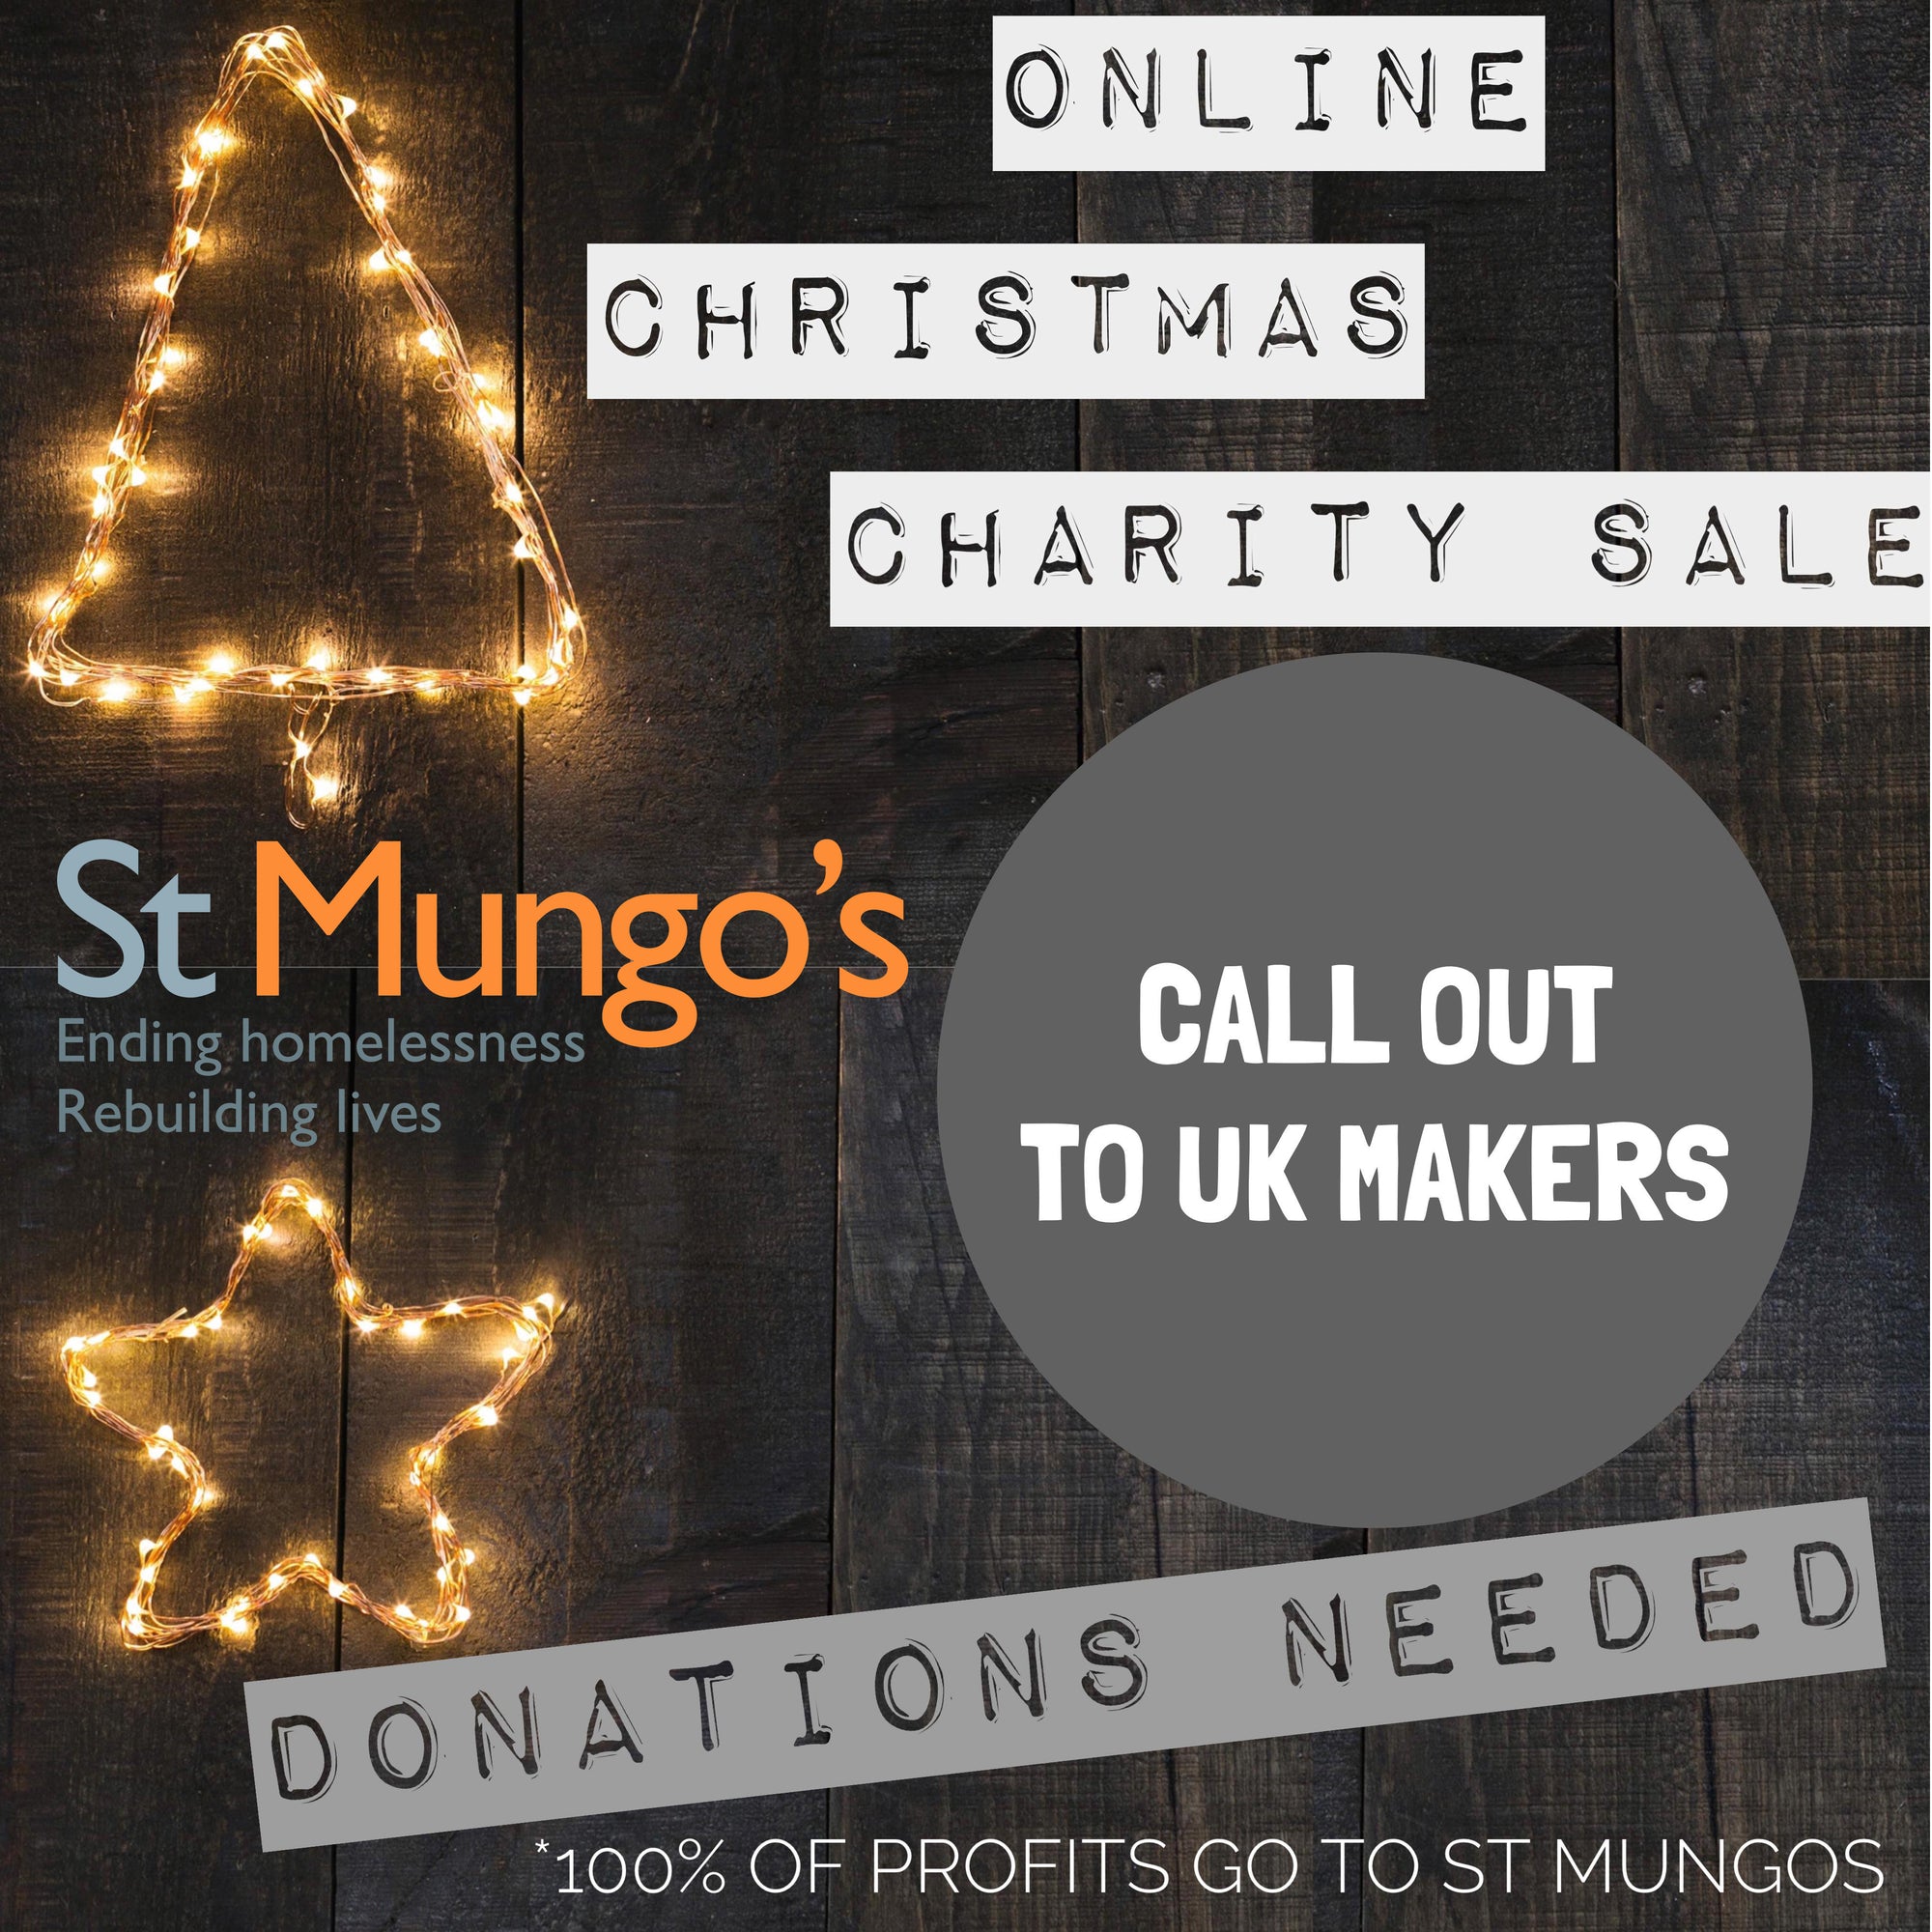 Online Christmas Charity Sale in Aid of St Mungos -Donations Needed